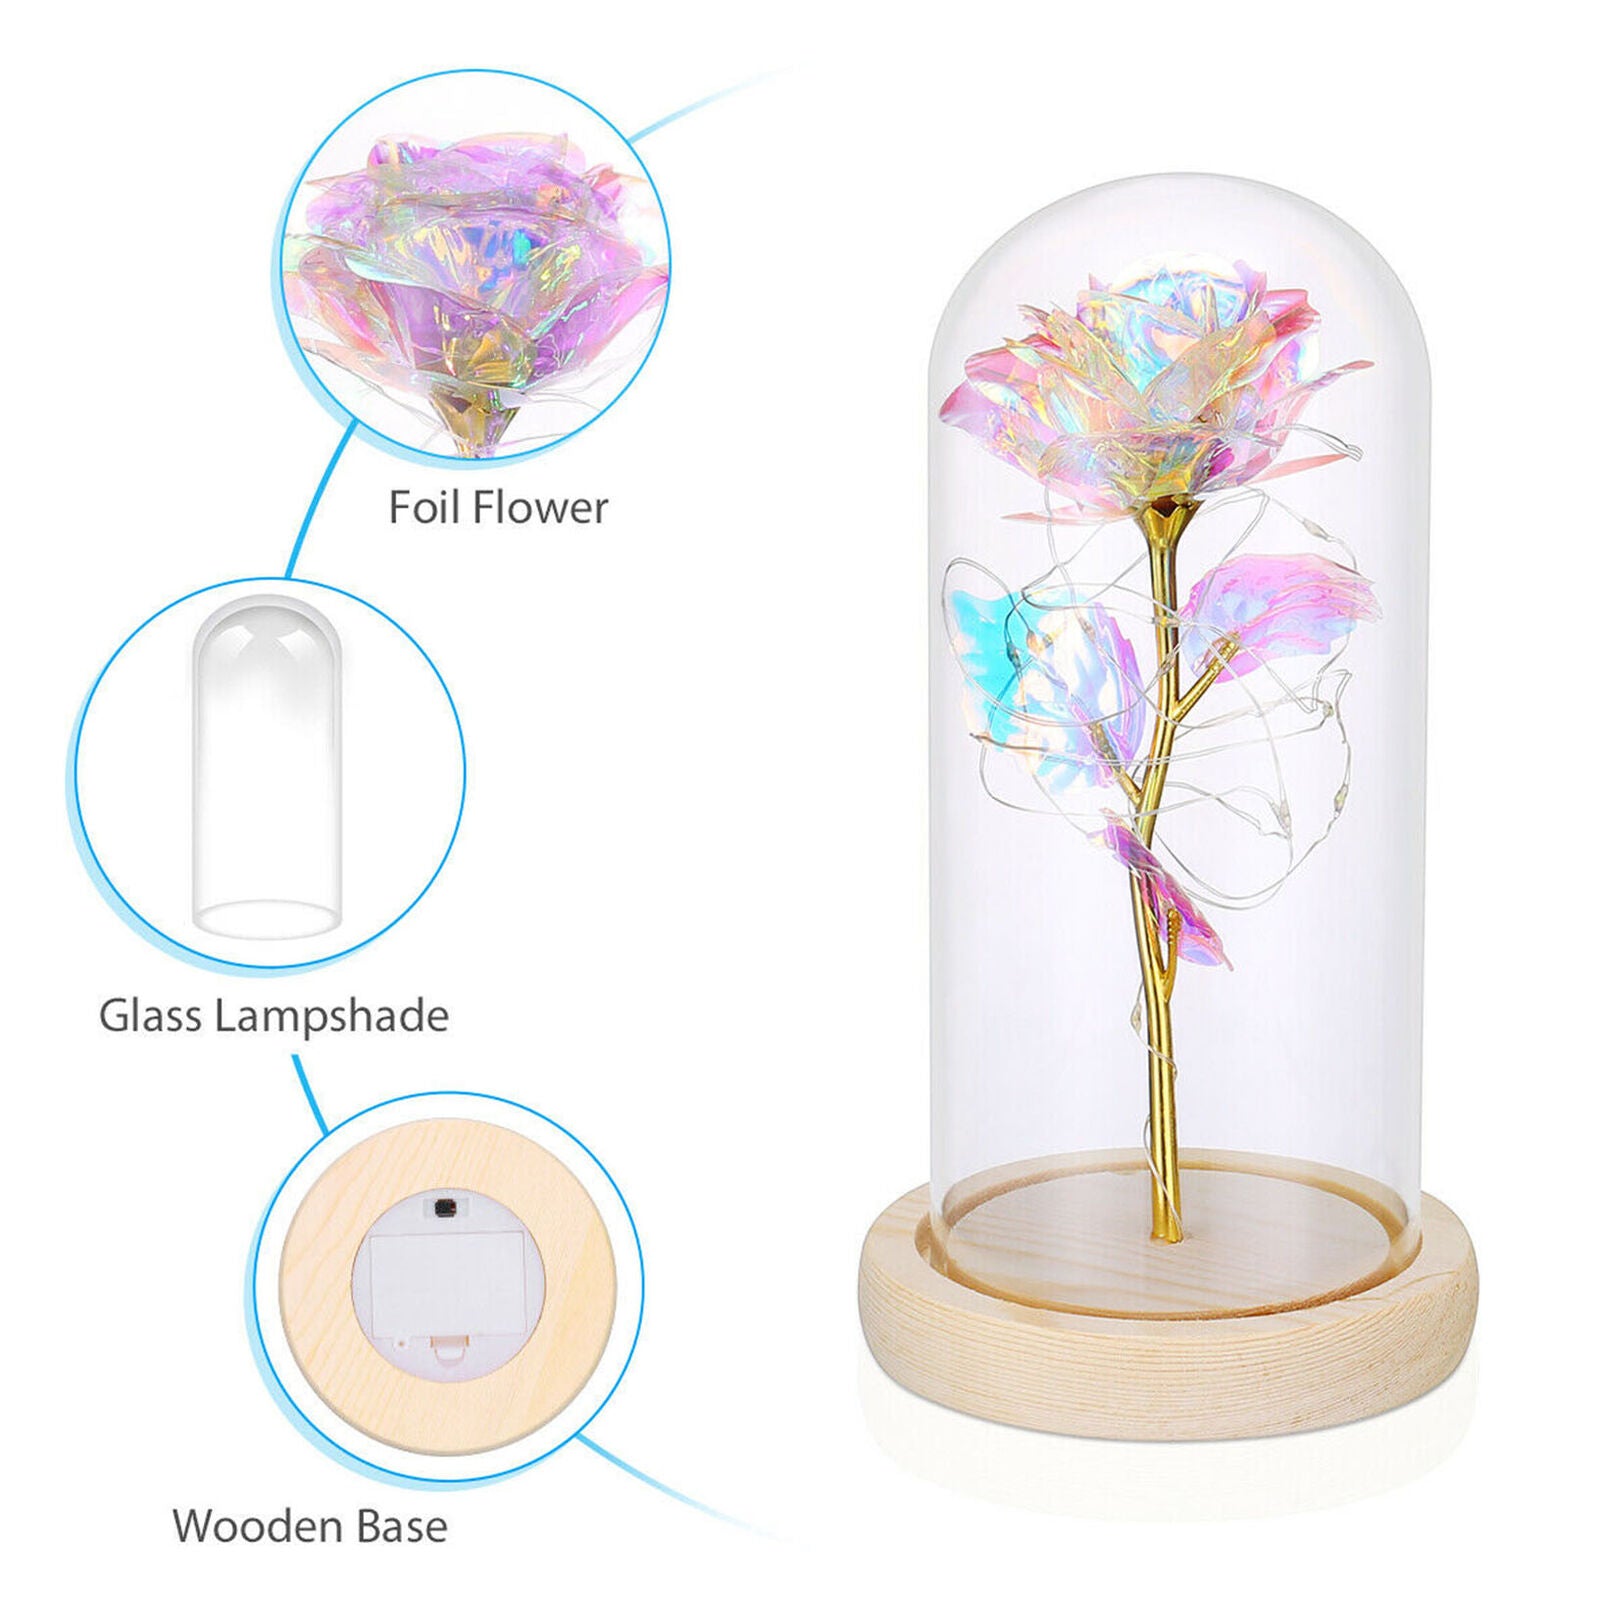 Crystal Galaxy Rose in the Glass Dome 20 Led Lights Gift for Girlfriend Mom Wife